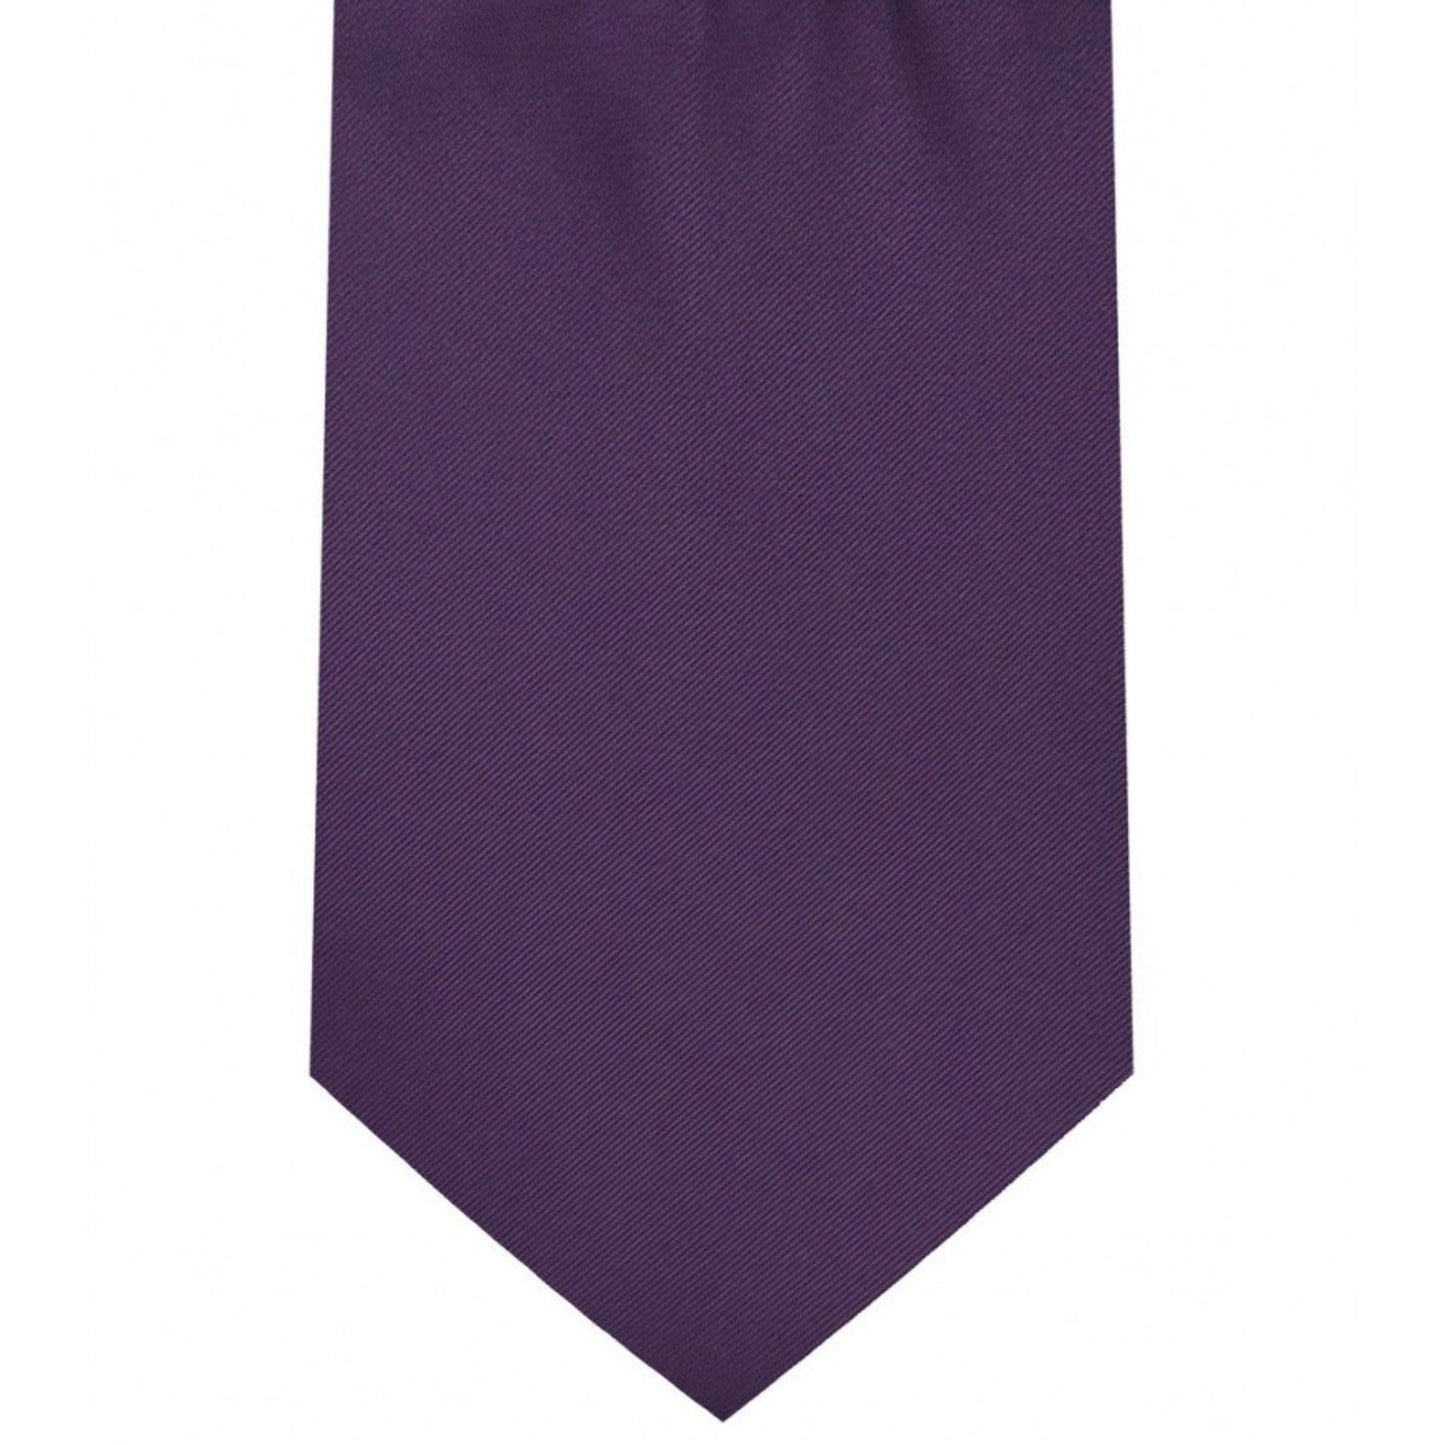 Classic Deep Purple Tie Regular width 3.5 inches With Matching Pocket Square | KCT Menswear